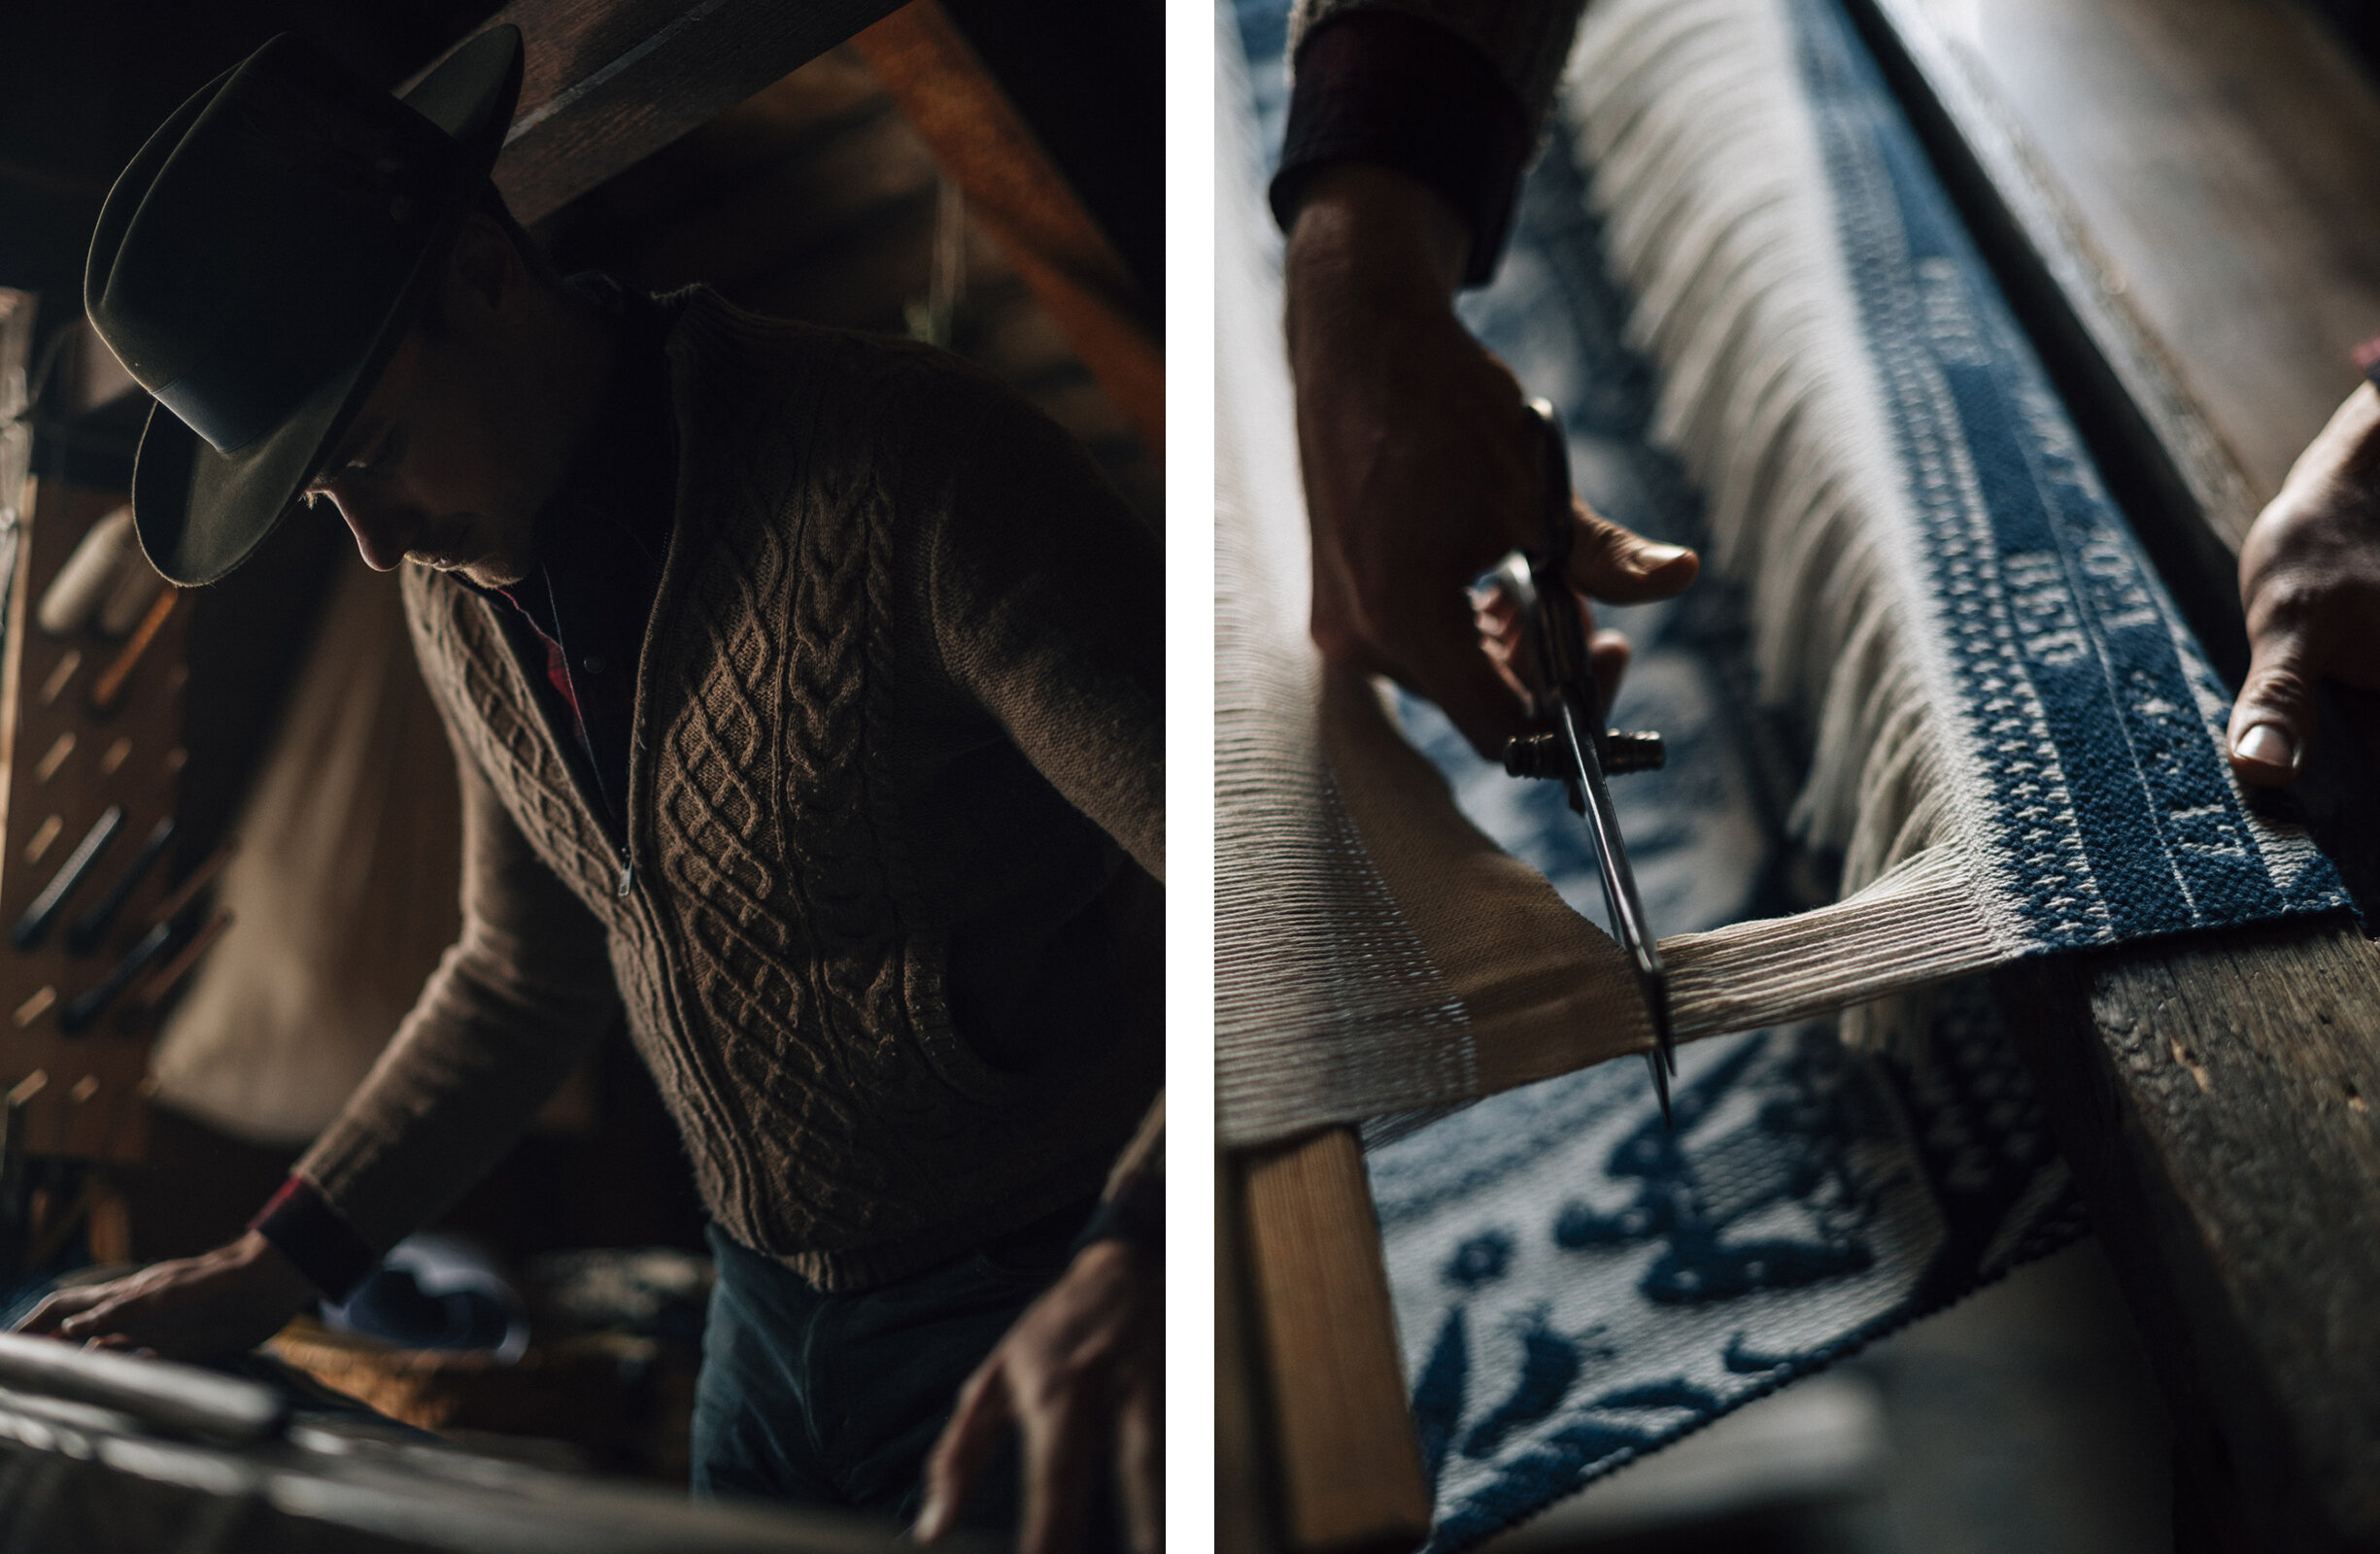  Justin Squizzero working on a loom that holds his 1860s-era Jacquard head in the unfinished attic, or garret, of his farmhouse built circa 1810 in Newbury, VT. 